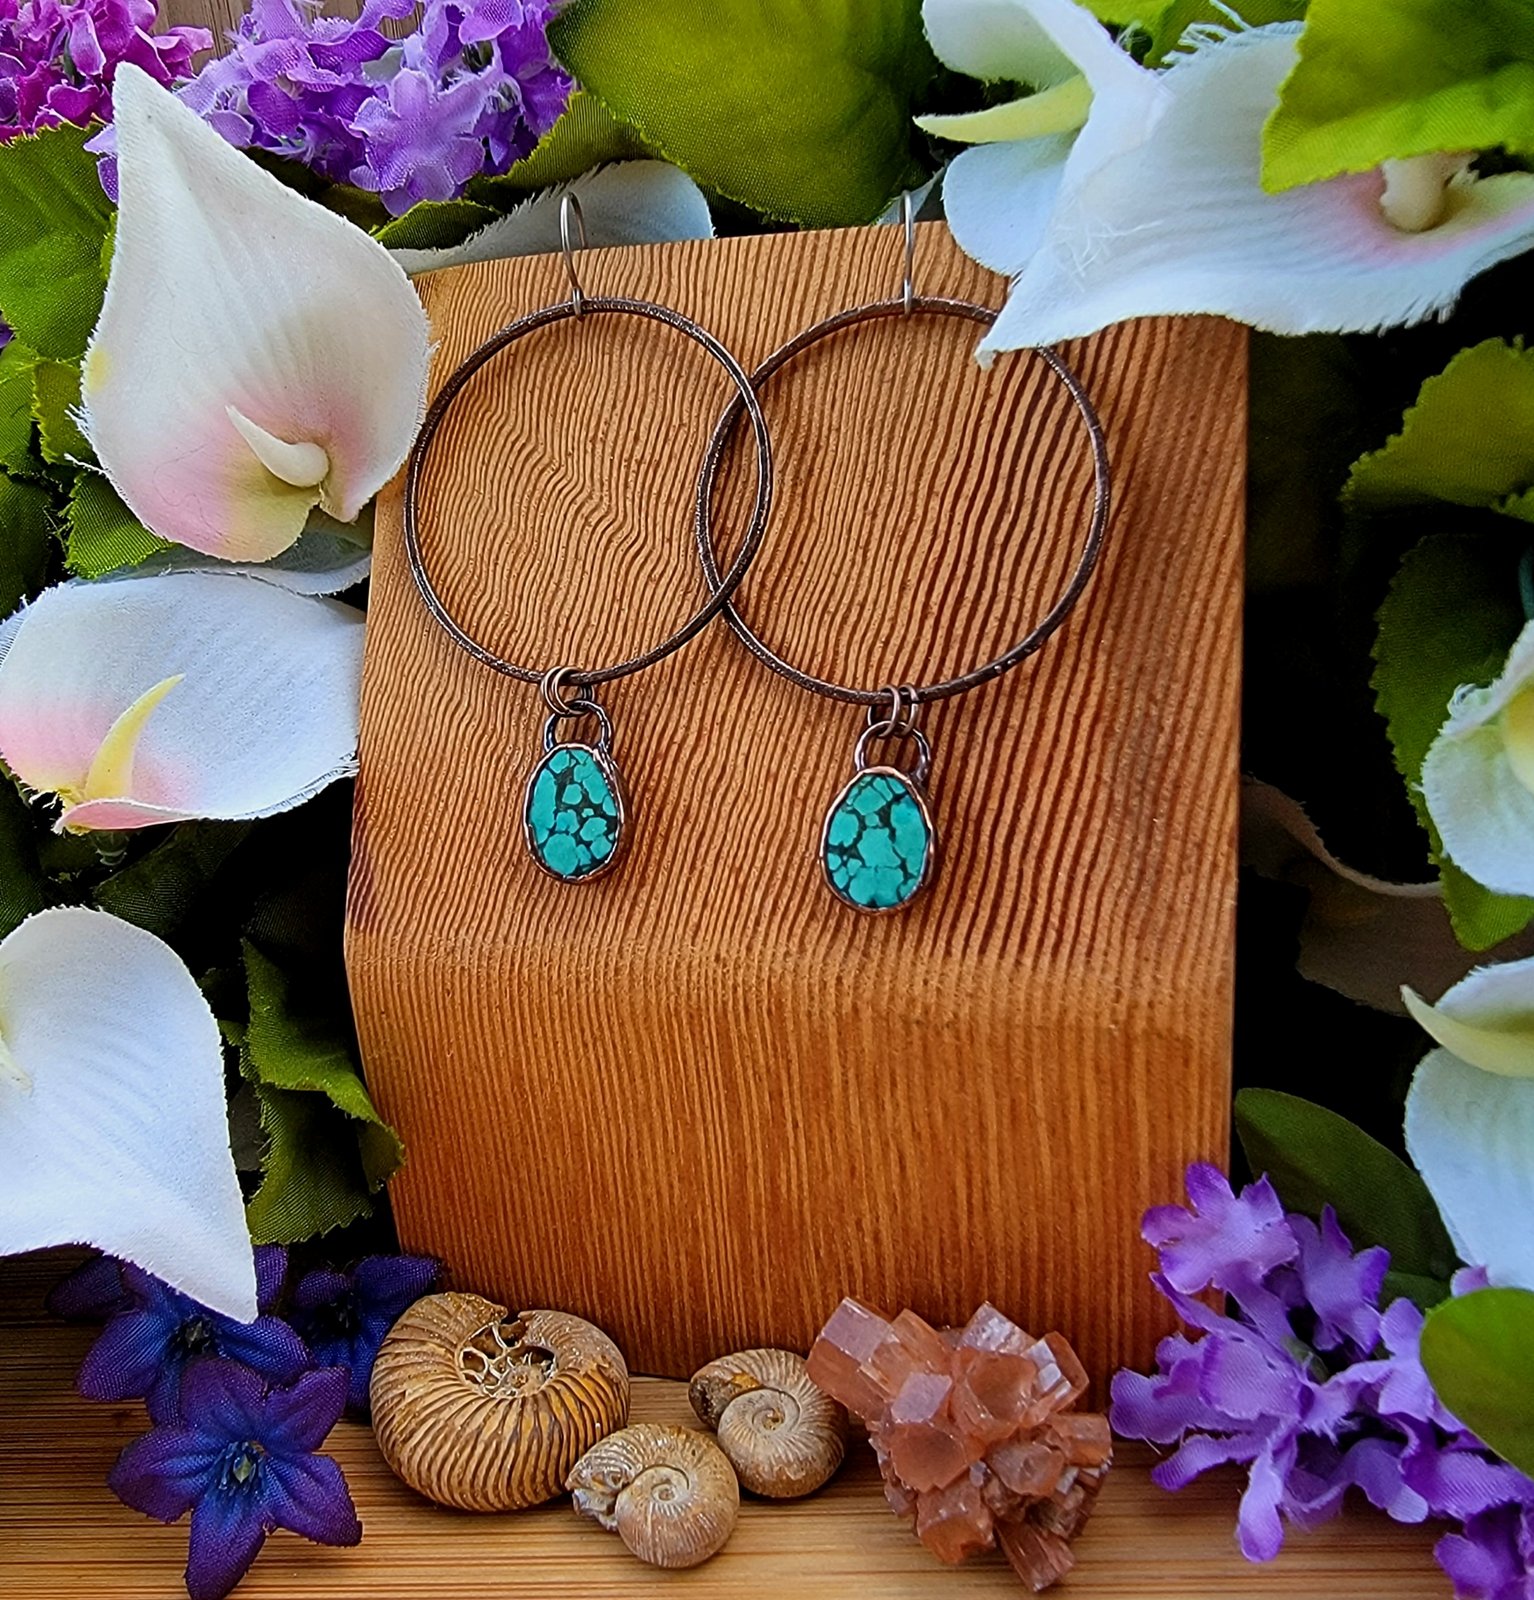 Large Gorgeous Turquoise Earrings – Winter Sun Trading Co.